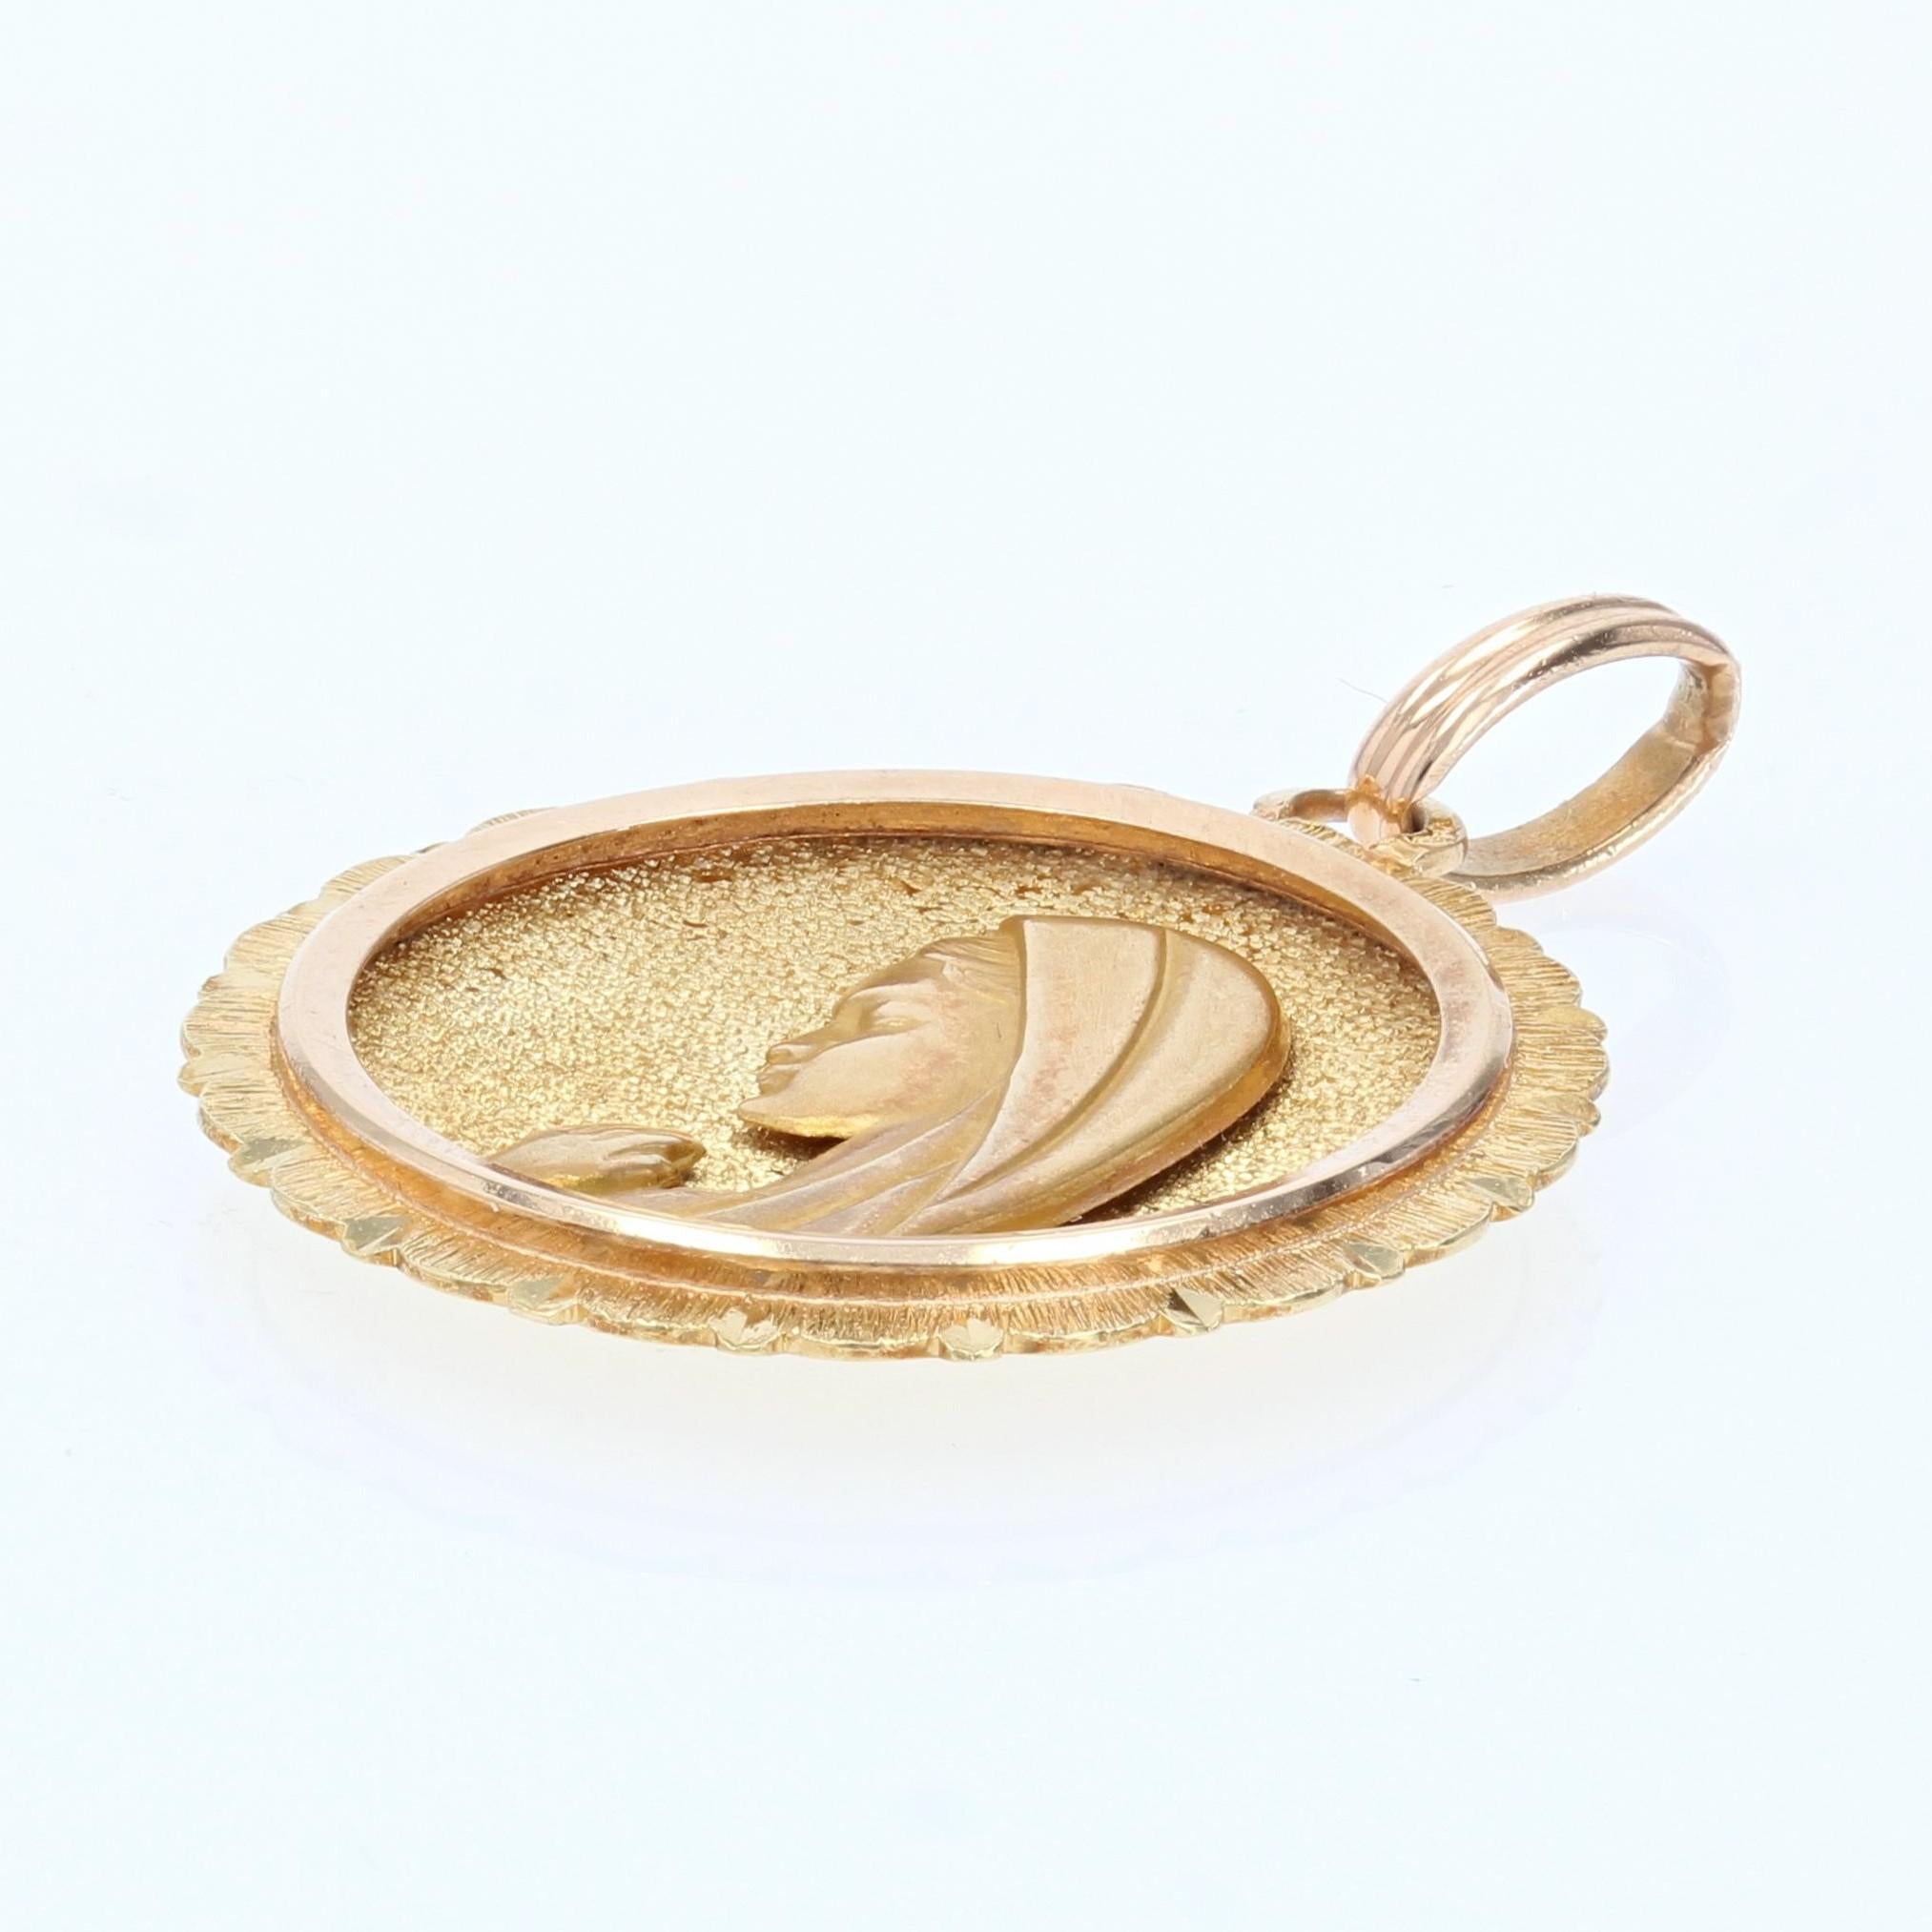 Medal in 18 karat yellow gold, eagle head hallmark.
Religious pendant concave on the front and convex on the back, it represents the profile of the Virgin Mary praying. The bottom of the medal is in yellow gold, encircled with rose gold and bordered